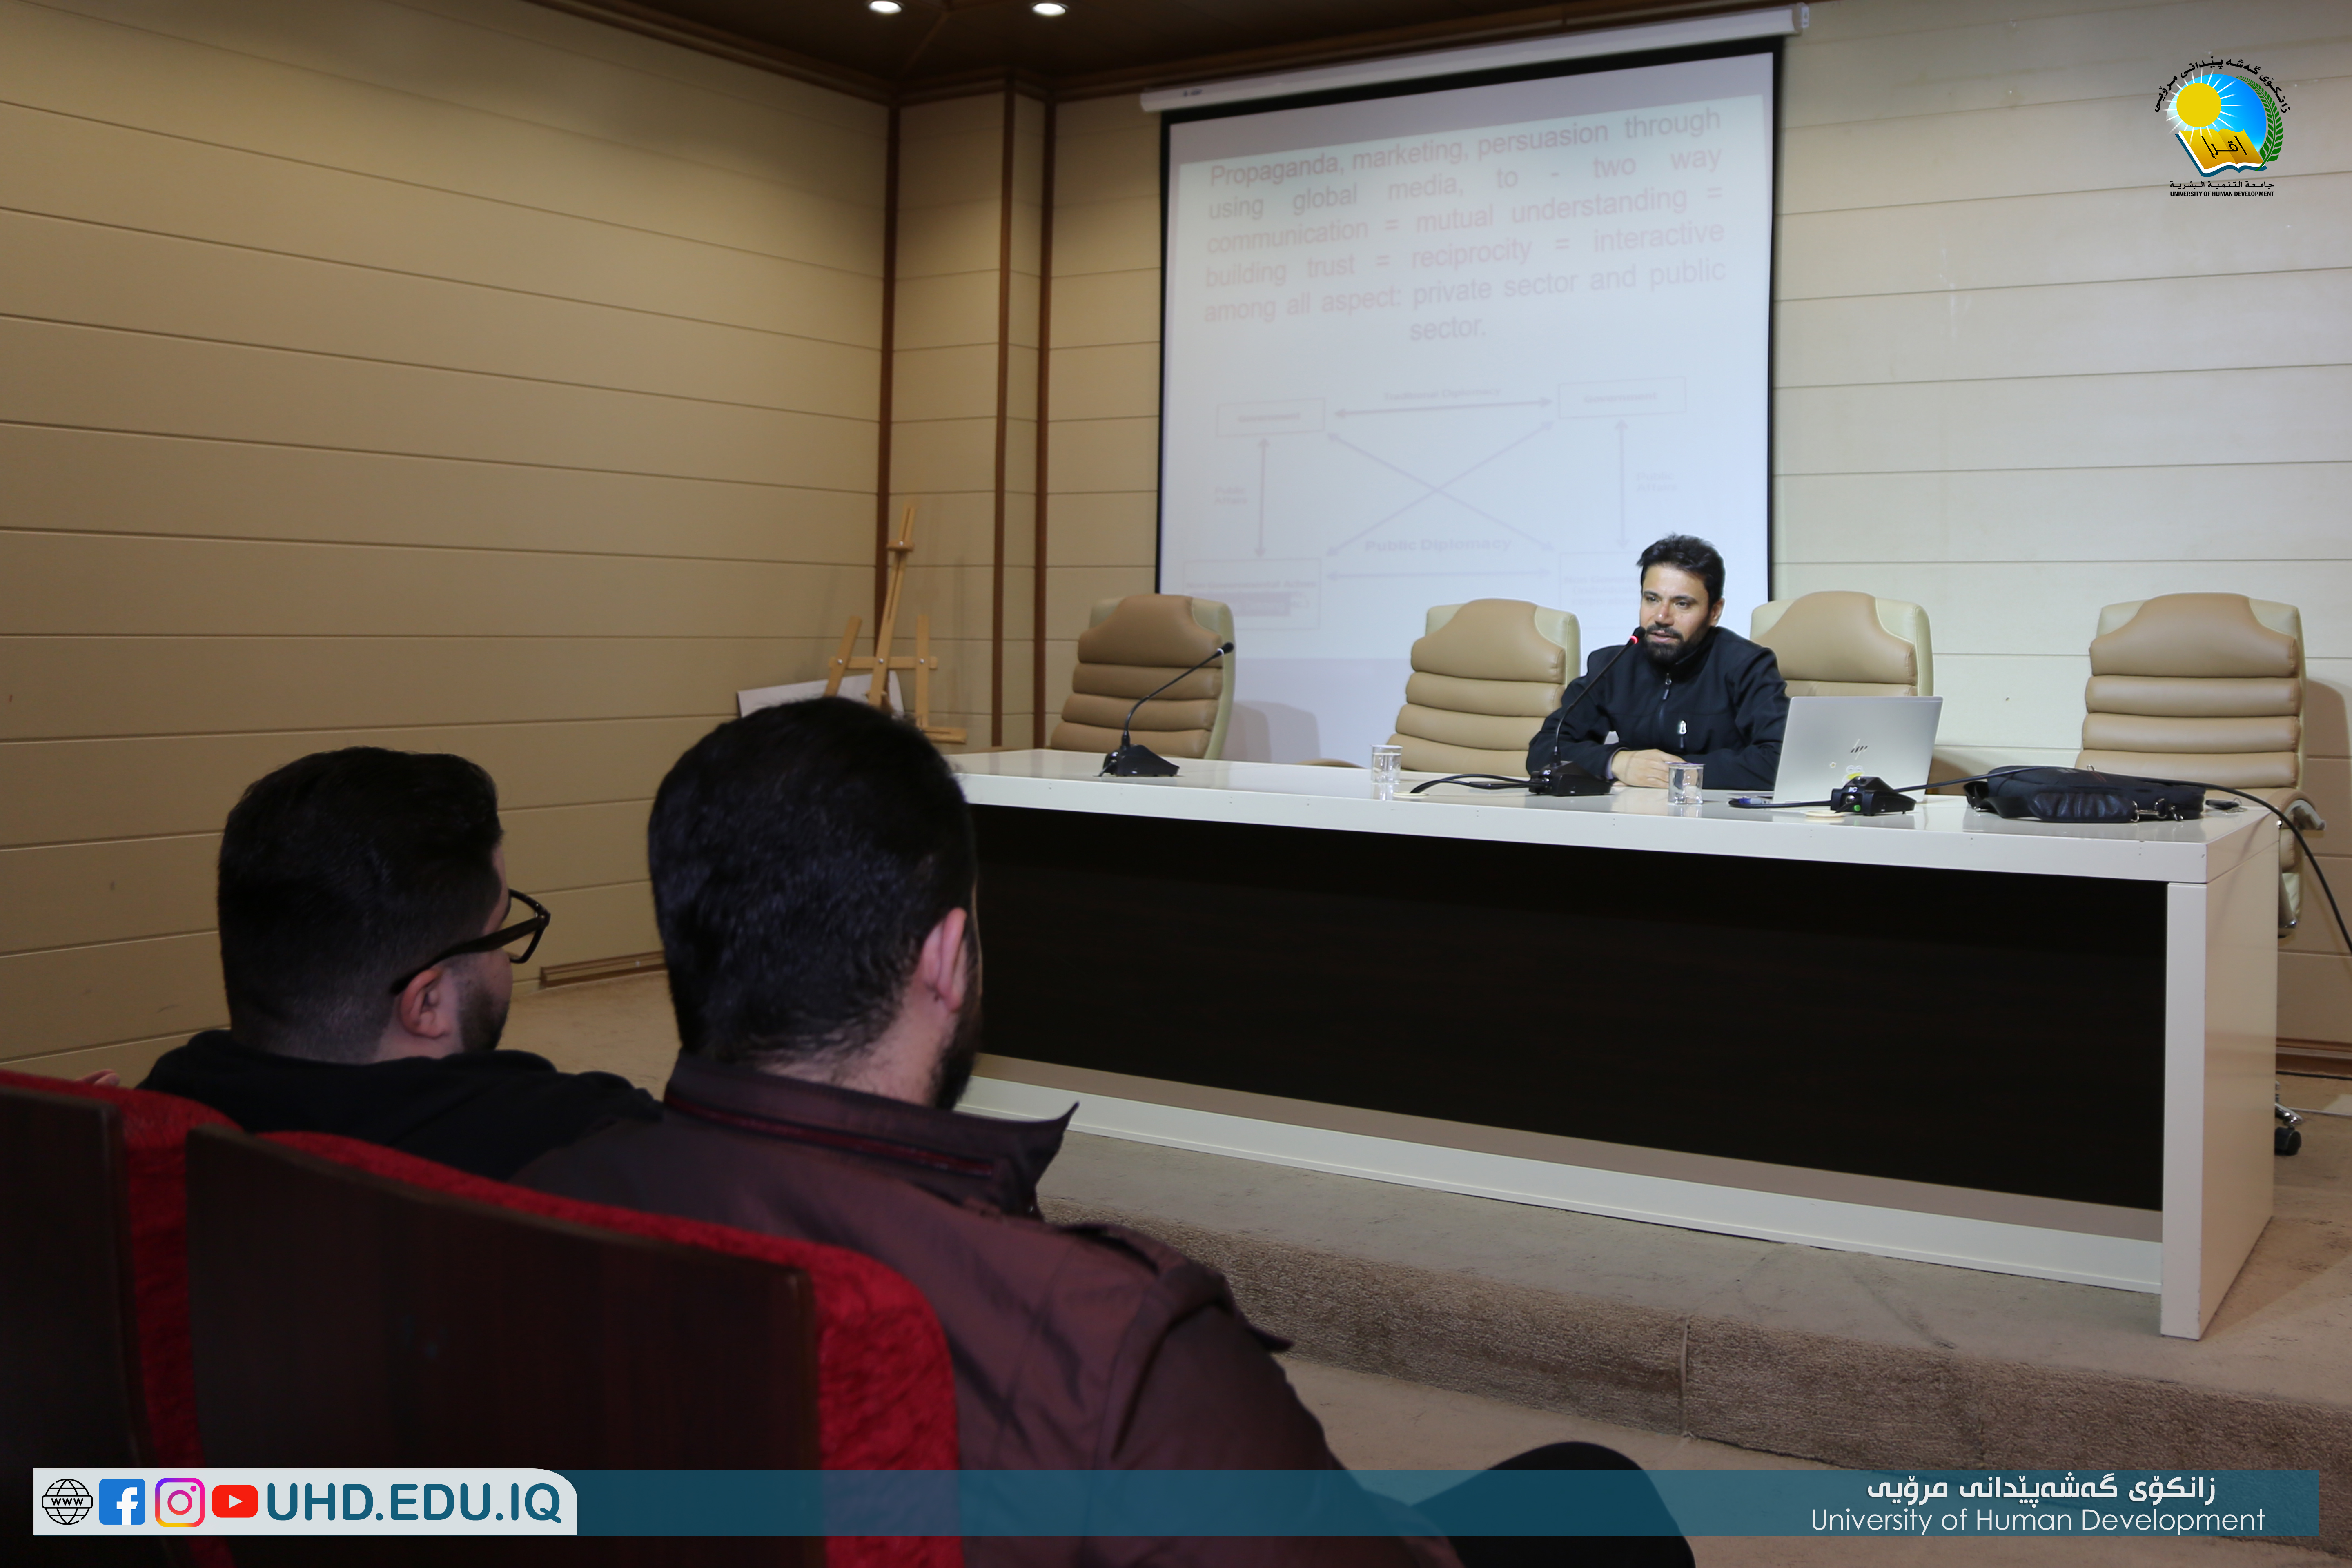 Students from Sulaimani University take a class at UHD